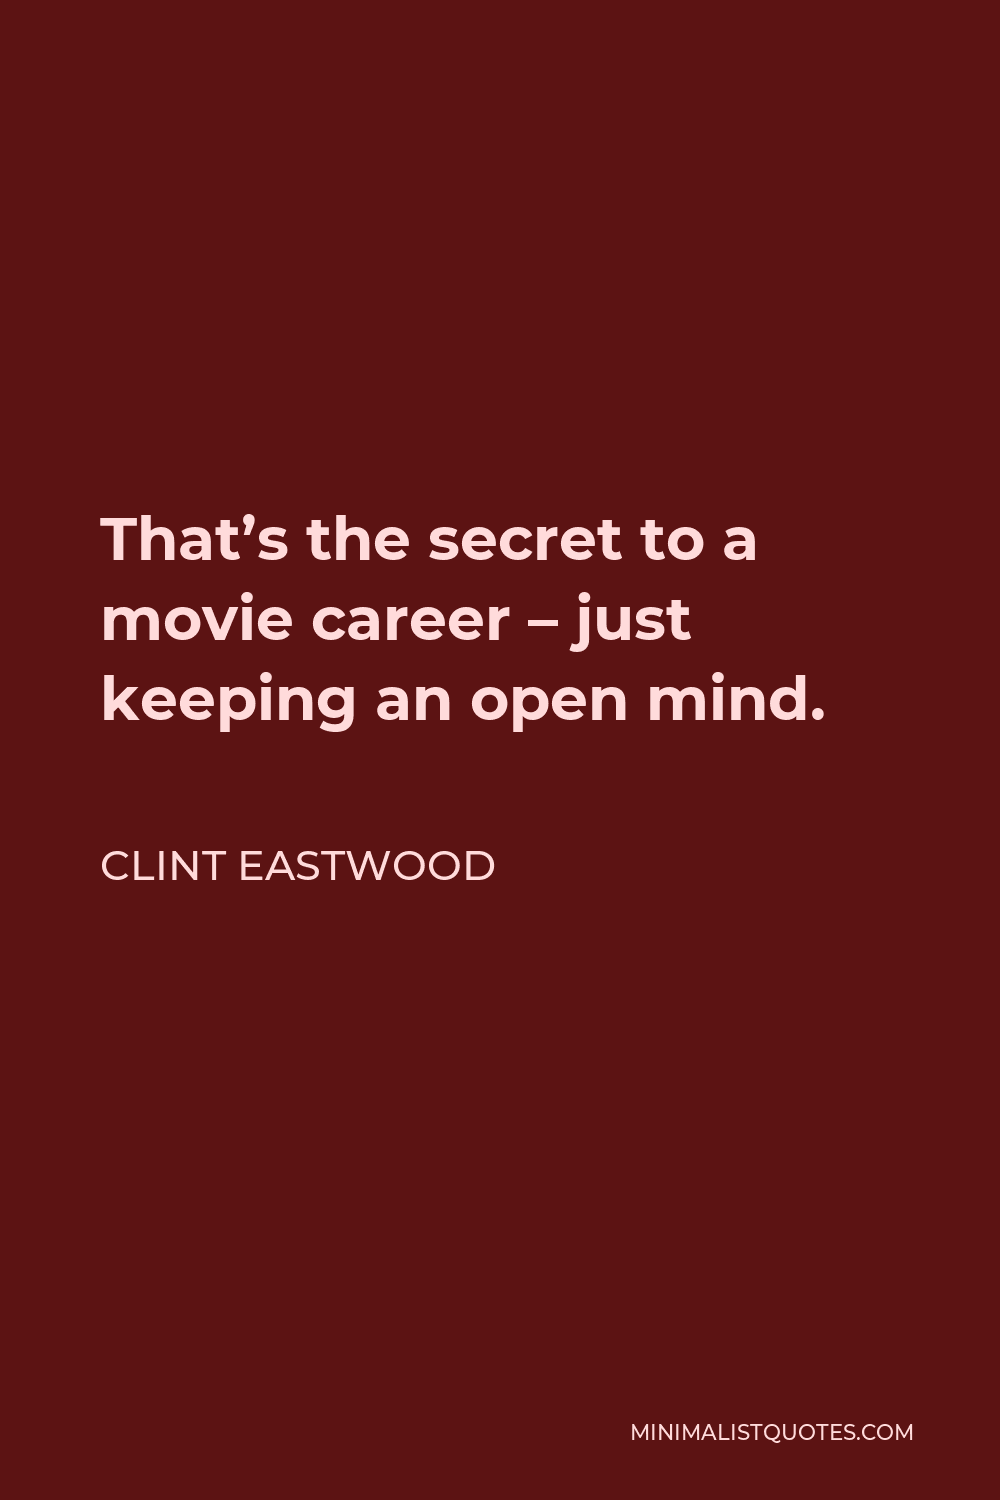 Clint Eastwood Quote: That's the secret to a movie career - just ...